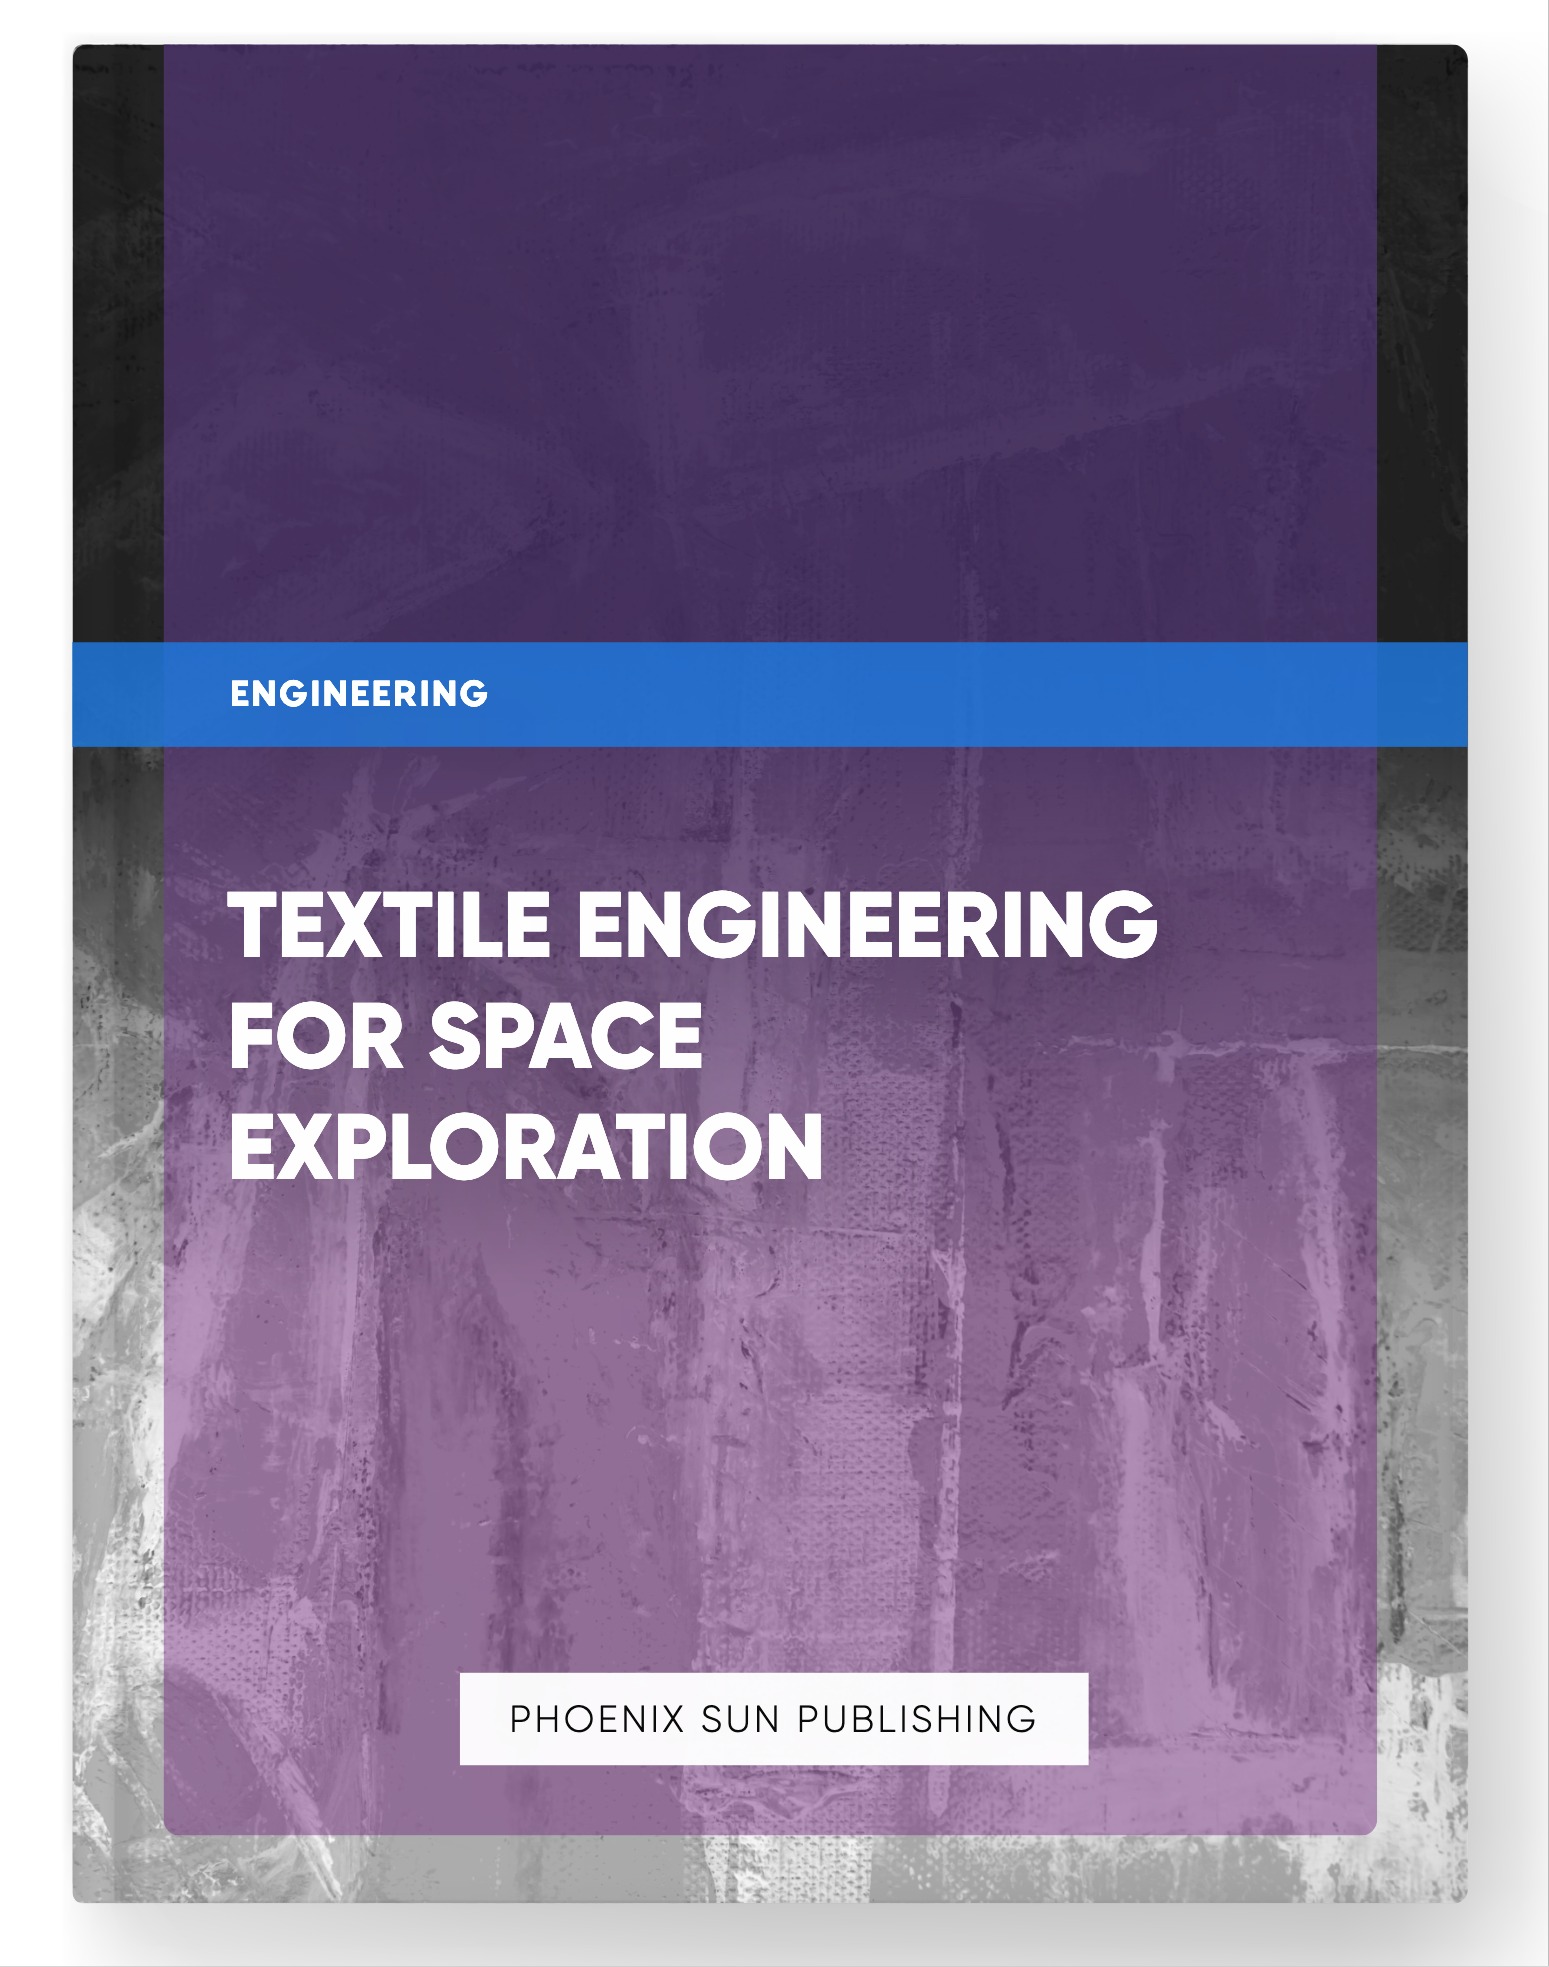 Textile Engineering for Space Exploration